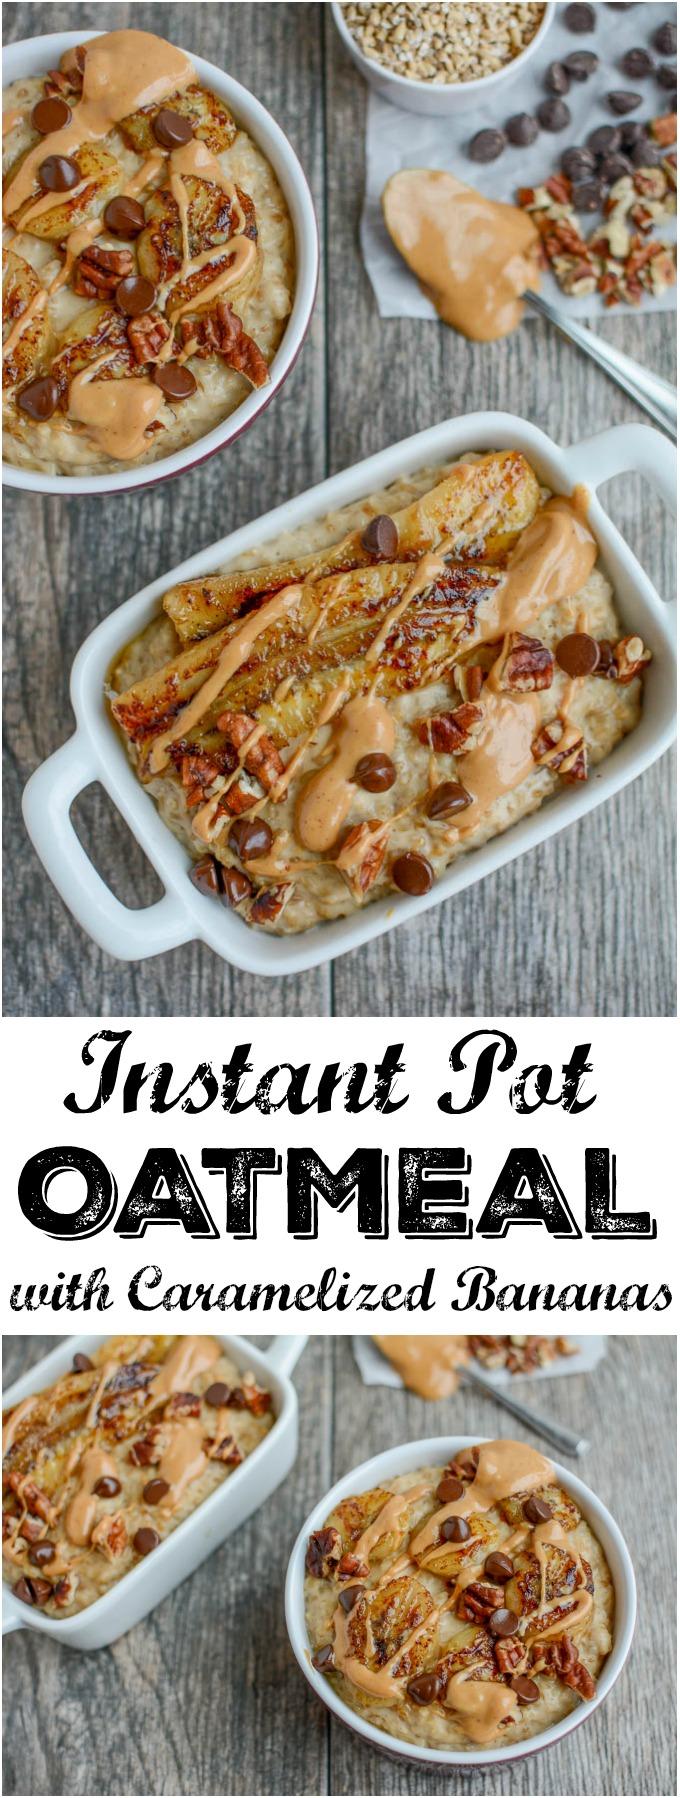 This Instant Pot Oatmeal with Caramelized Bananas is a quick, healthy breakfast option & can also be prepped ahead of time and reheated during a busy week!